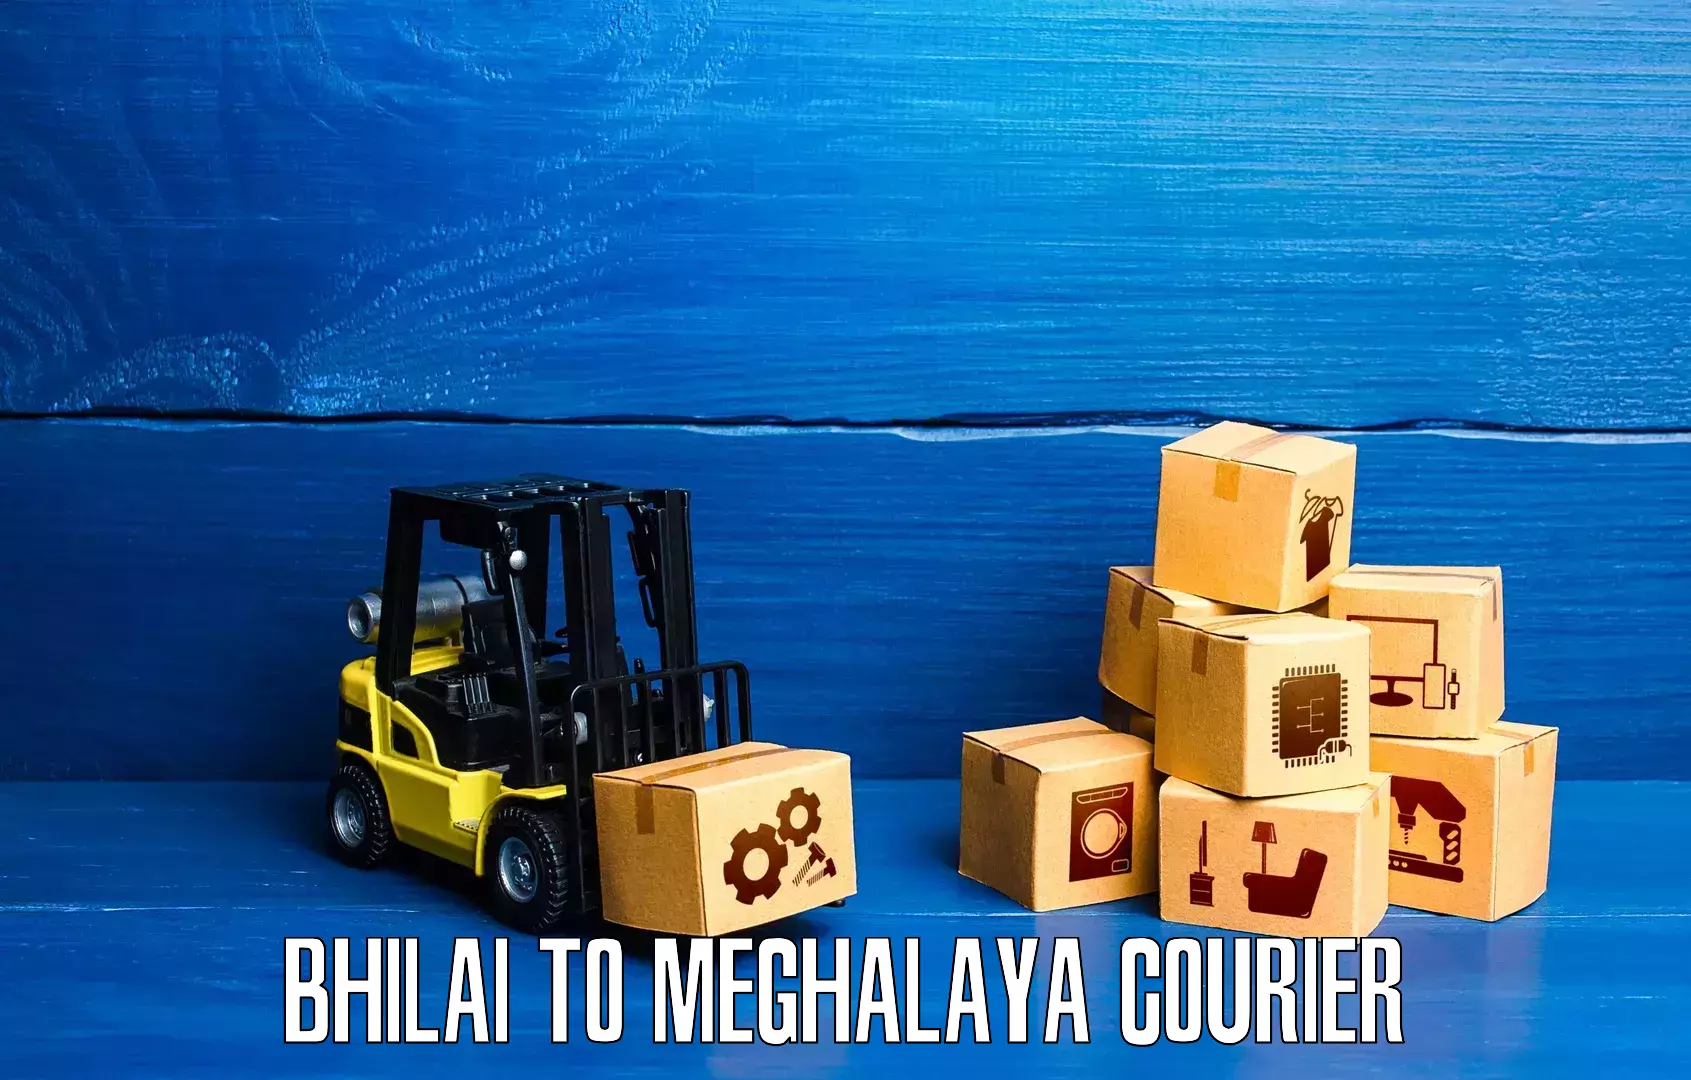 Reliable delivery network Bhilai to Meghalaya